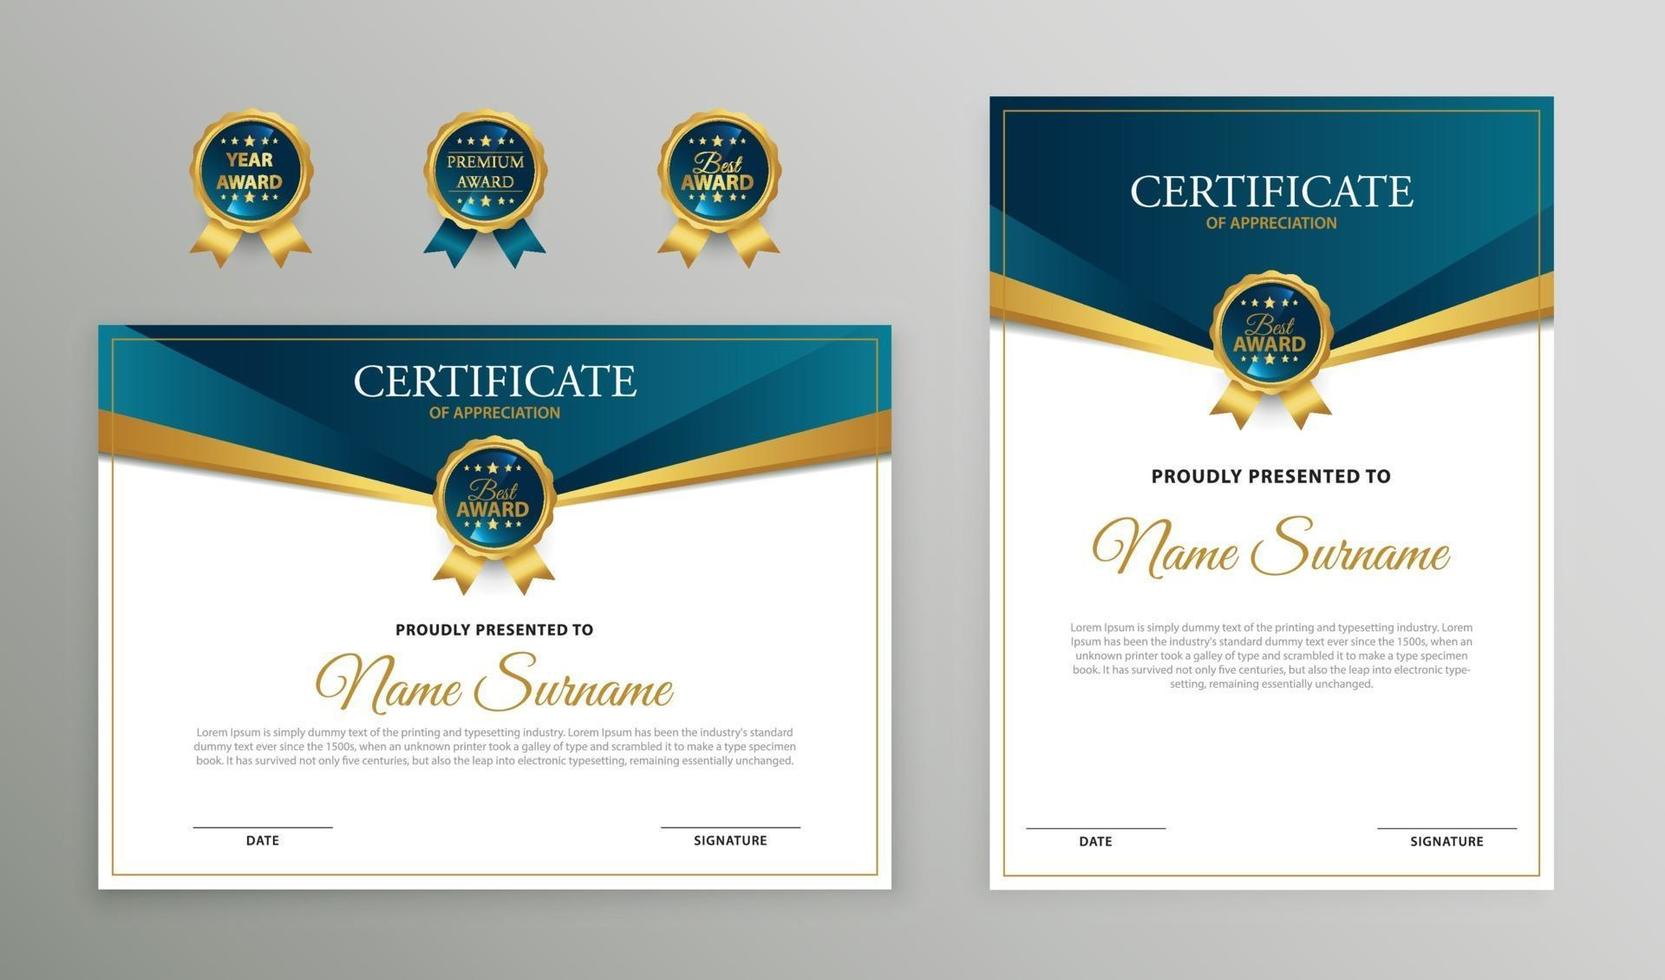 CREATIVE CERTIFCATE DIPLOMA OR DEGREE vector